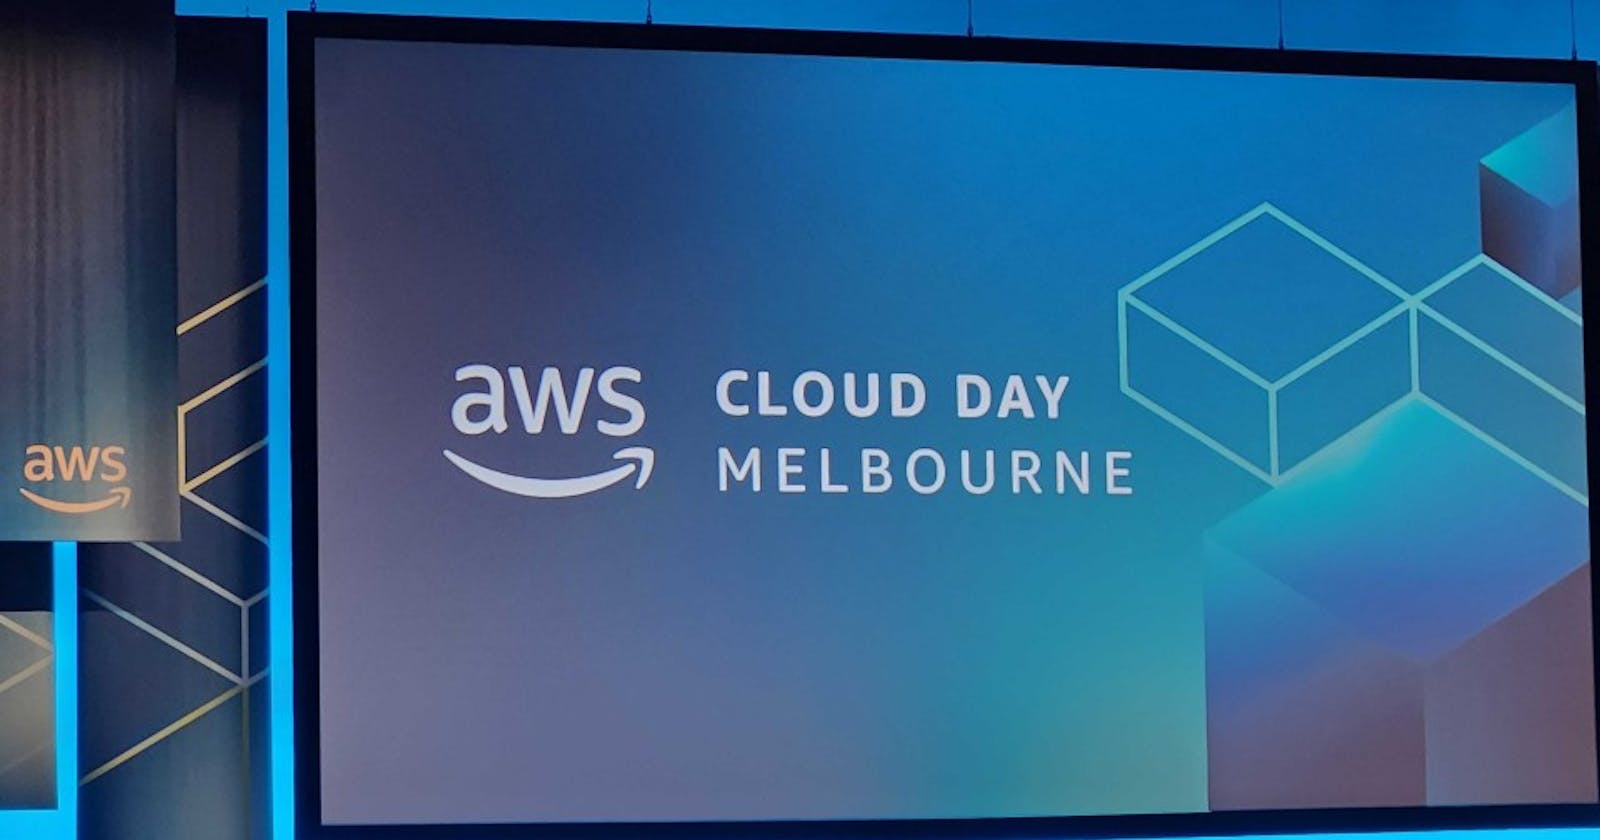 My Thoughts On The AWS Cloud Day Melbourne Event